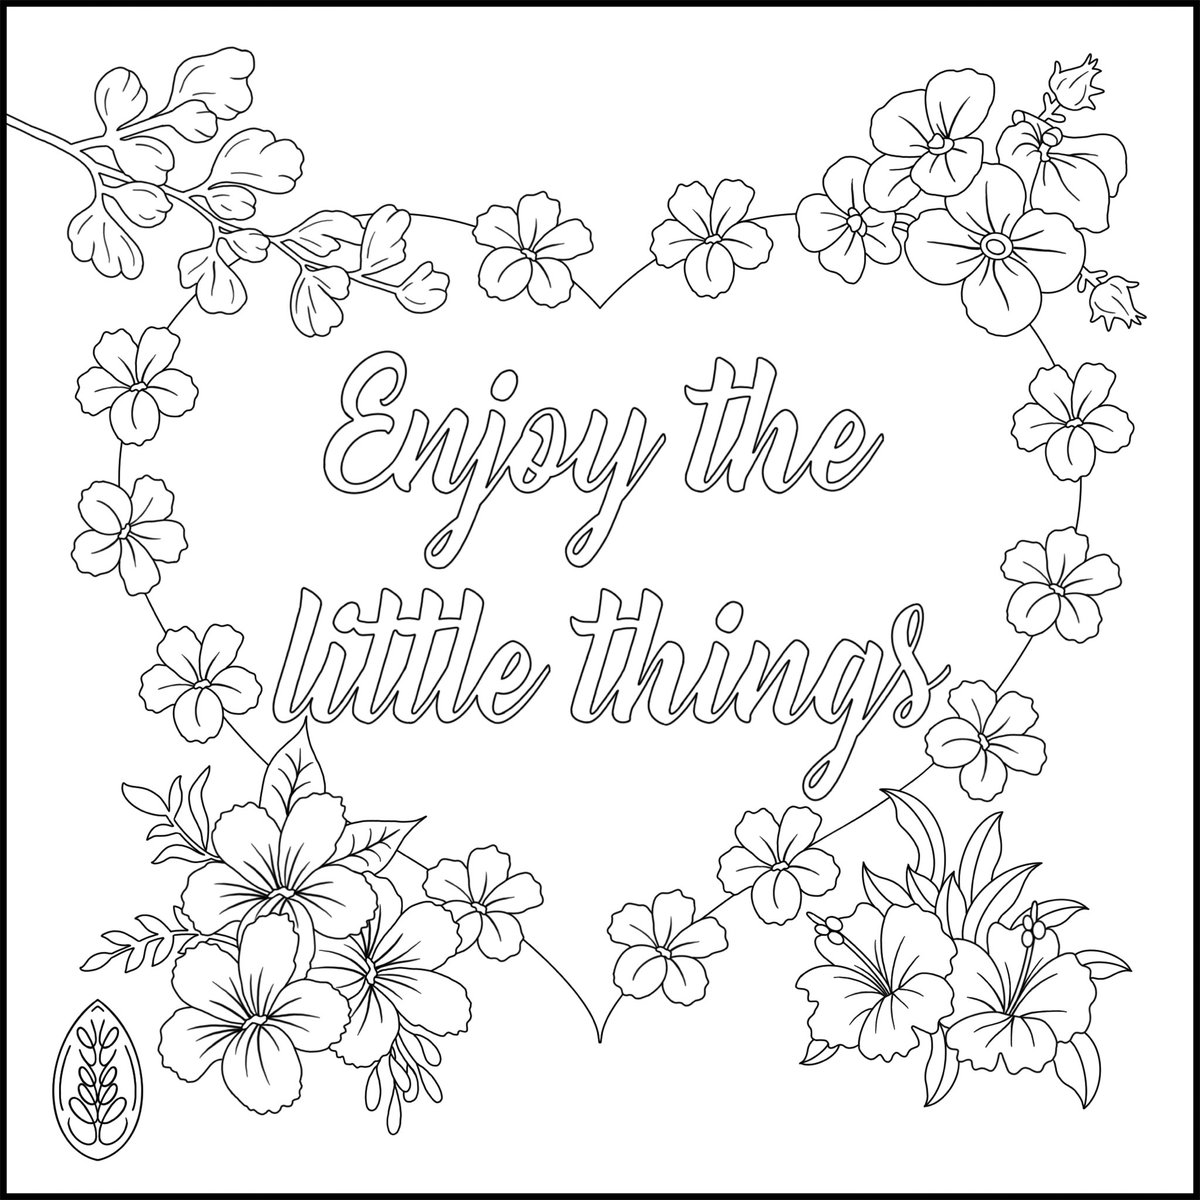 🌸 Enjoy the little things 🌸

From my Mindful Moments colouring book, free to download & colour 🎨

🌸 link in bio 🌸

#zendoodlesbycatherine #zendoodle #mindfulmoments #arttherapy #coloringbook #mindfulness #mindfulnessforkids #colouringtherapy #coloringpage